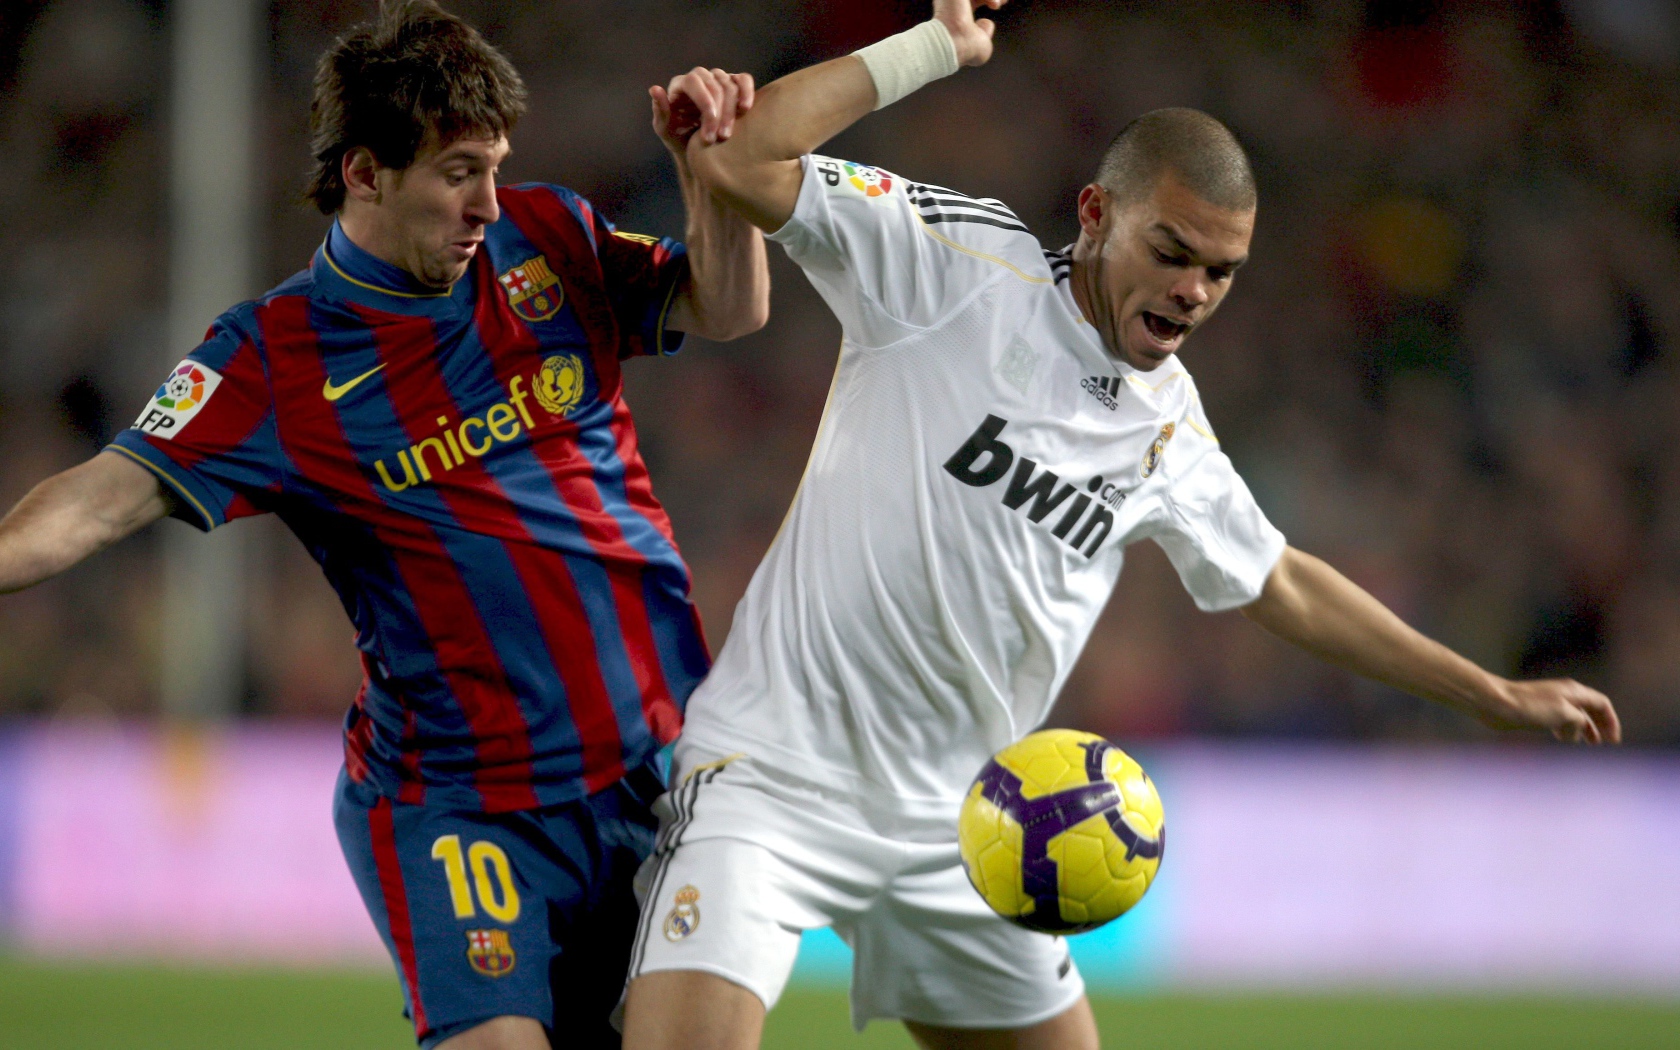 Real Madrid Pepe is fighting for the ball